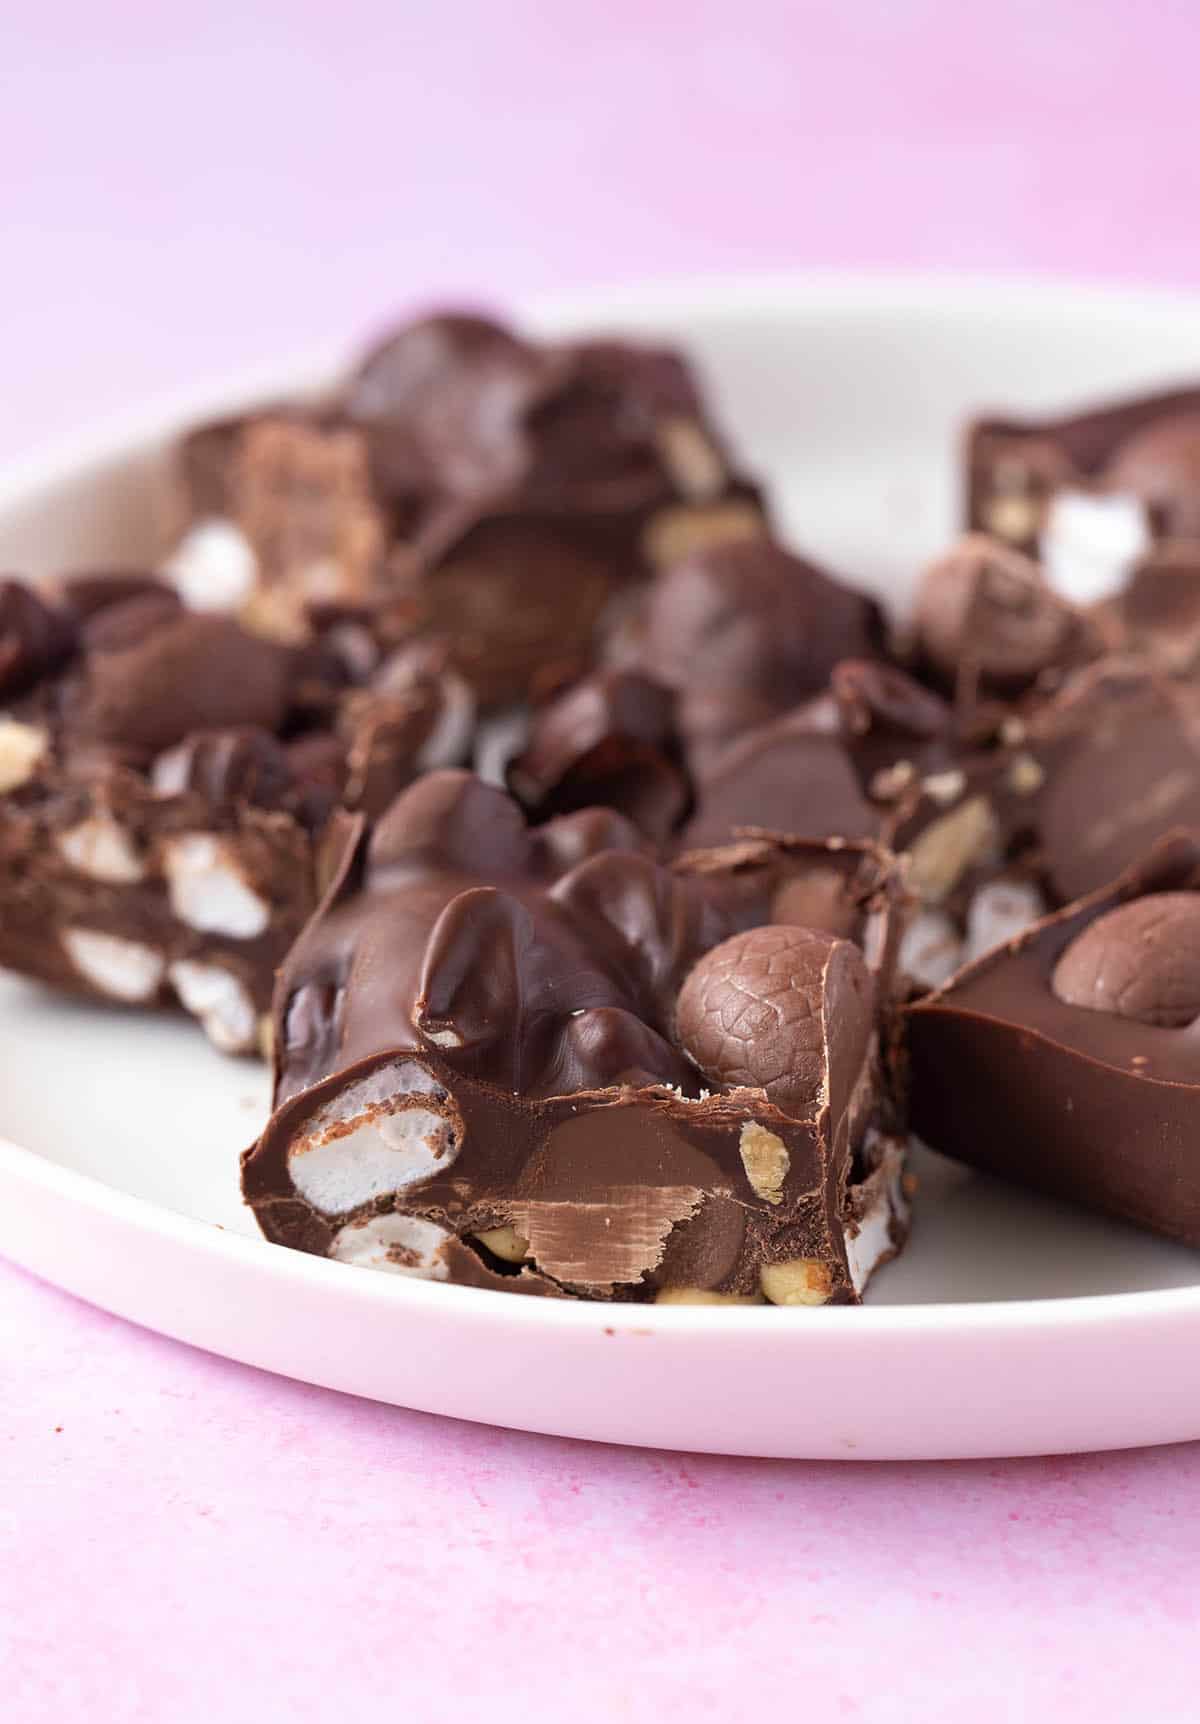 A plate of Easter egg rocky road on a pink background.